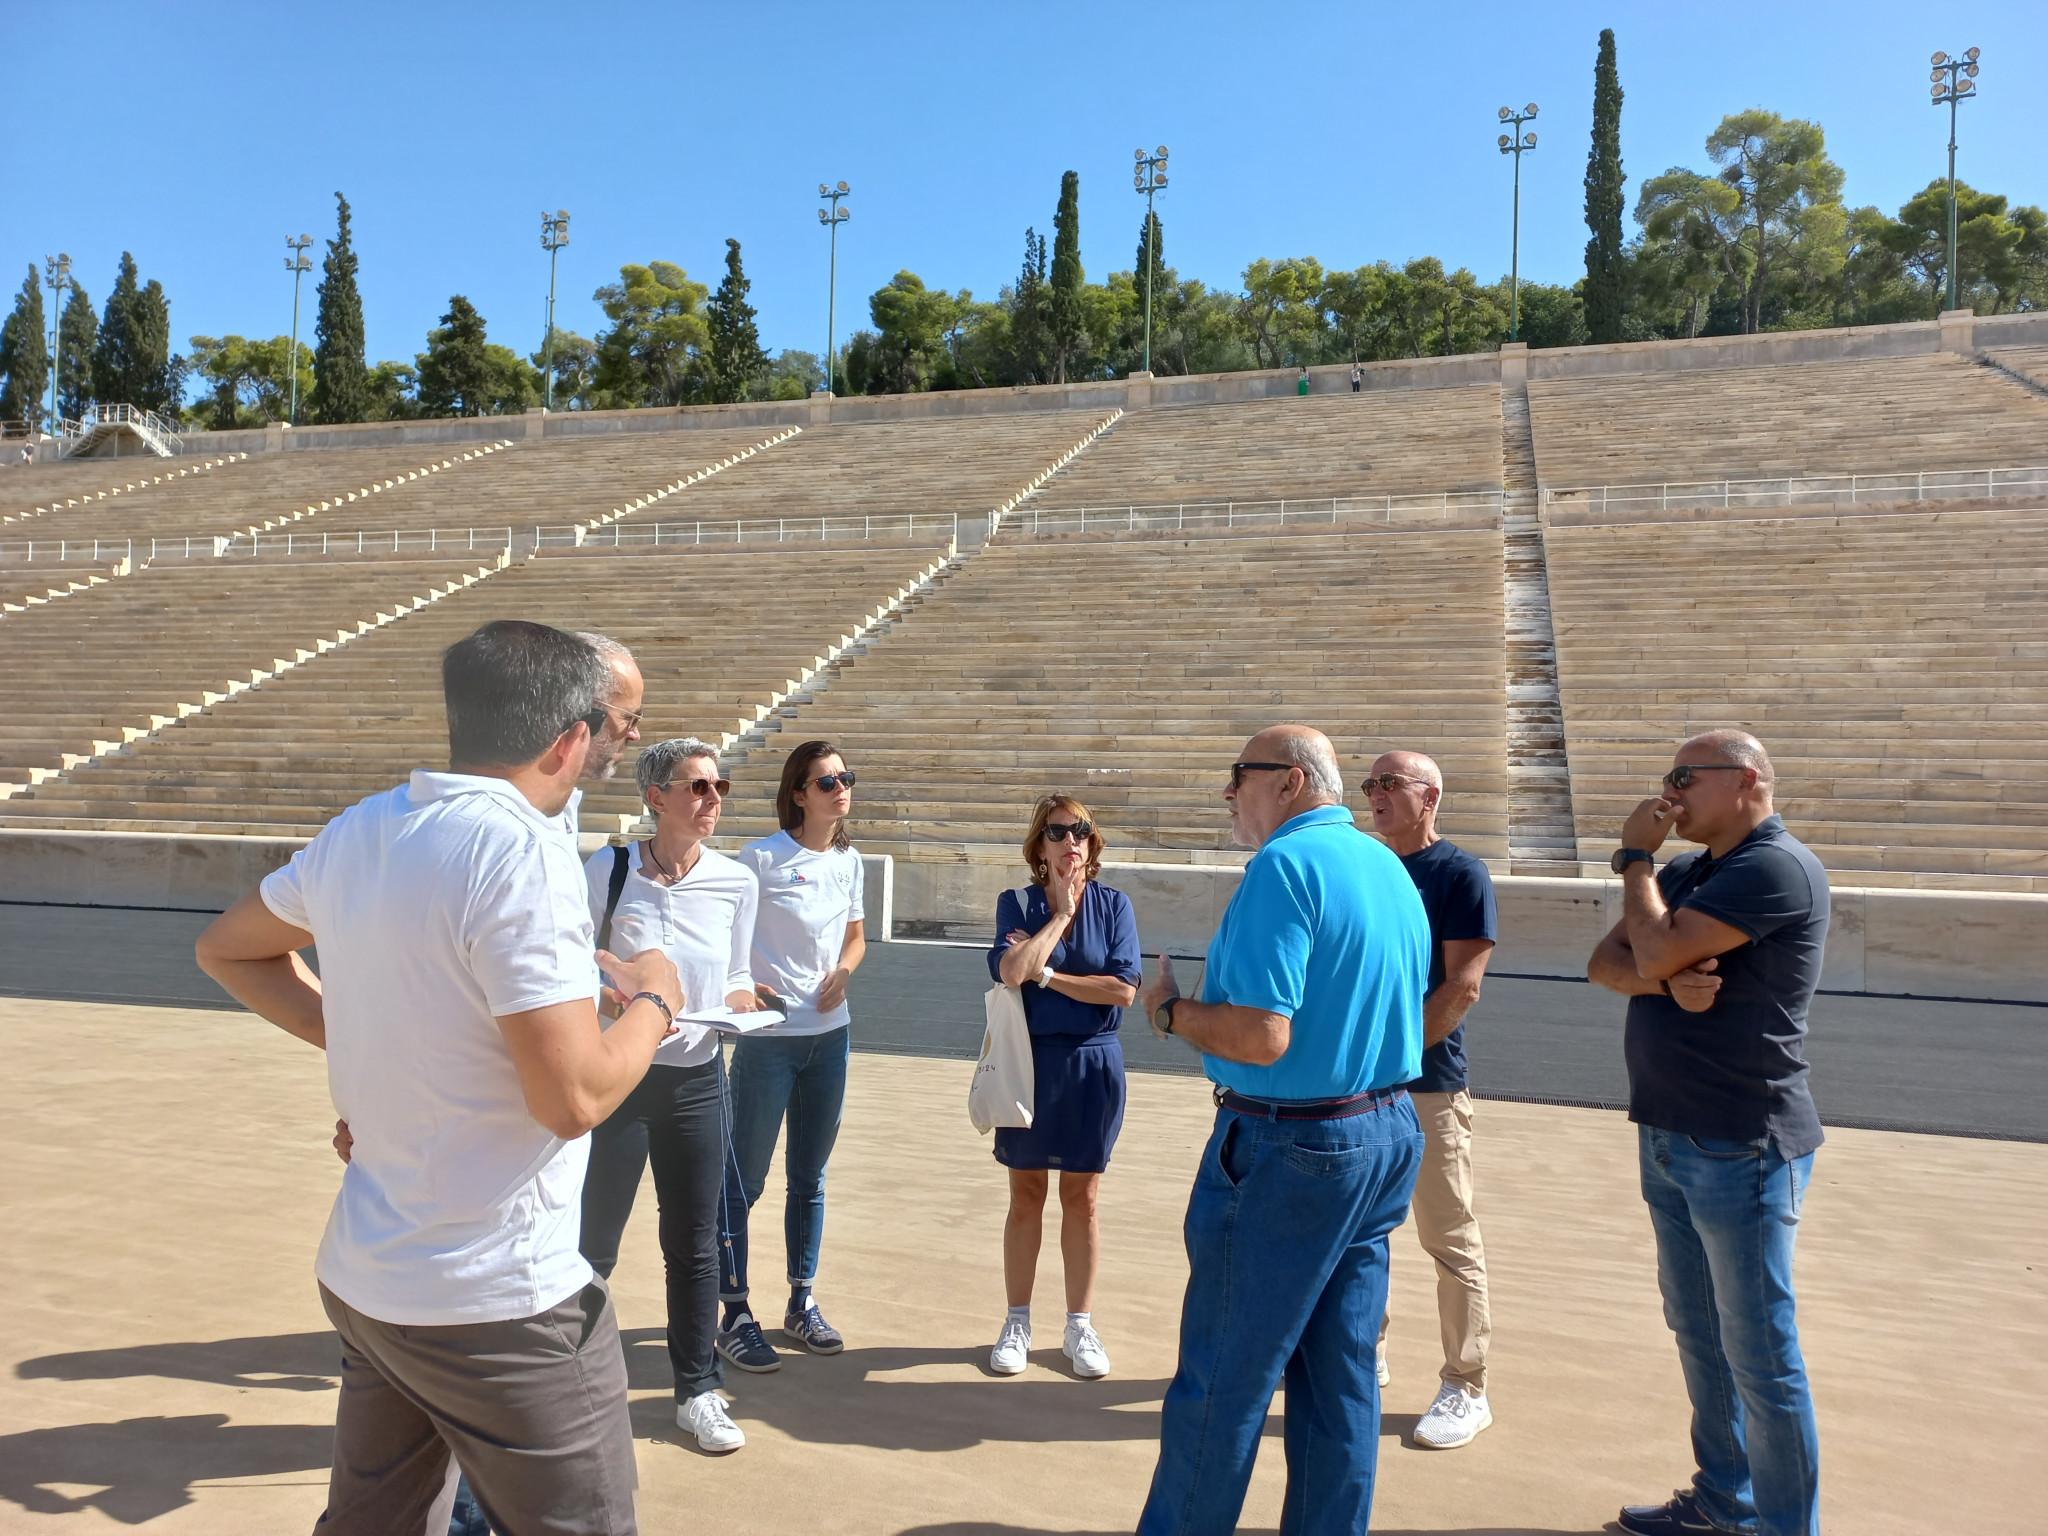 Paris 2024 representatives were also taken to the Panathenaic Stadium in Athens which is set to host the formal Handover Ceremony in 2024  ©Hellenic Olympic Committee